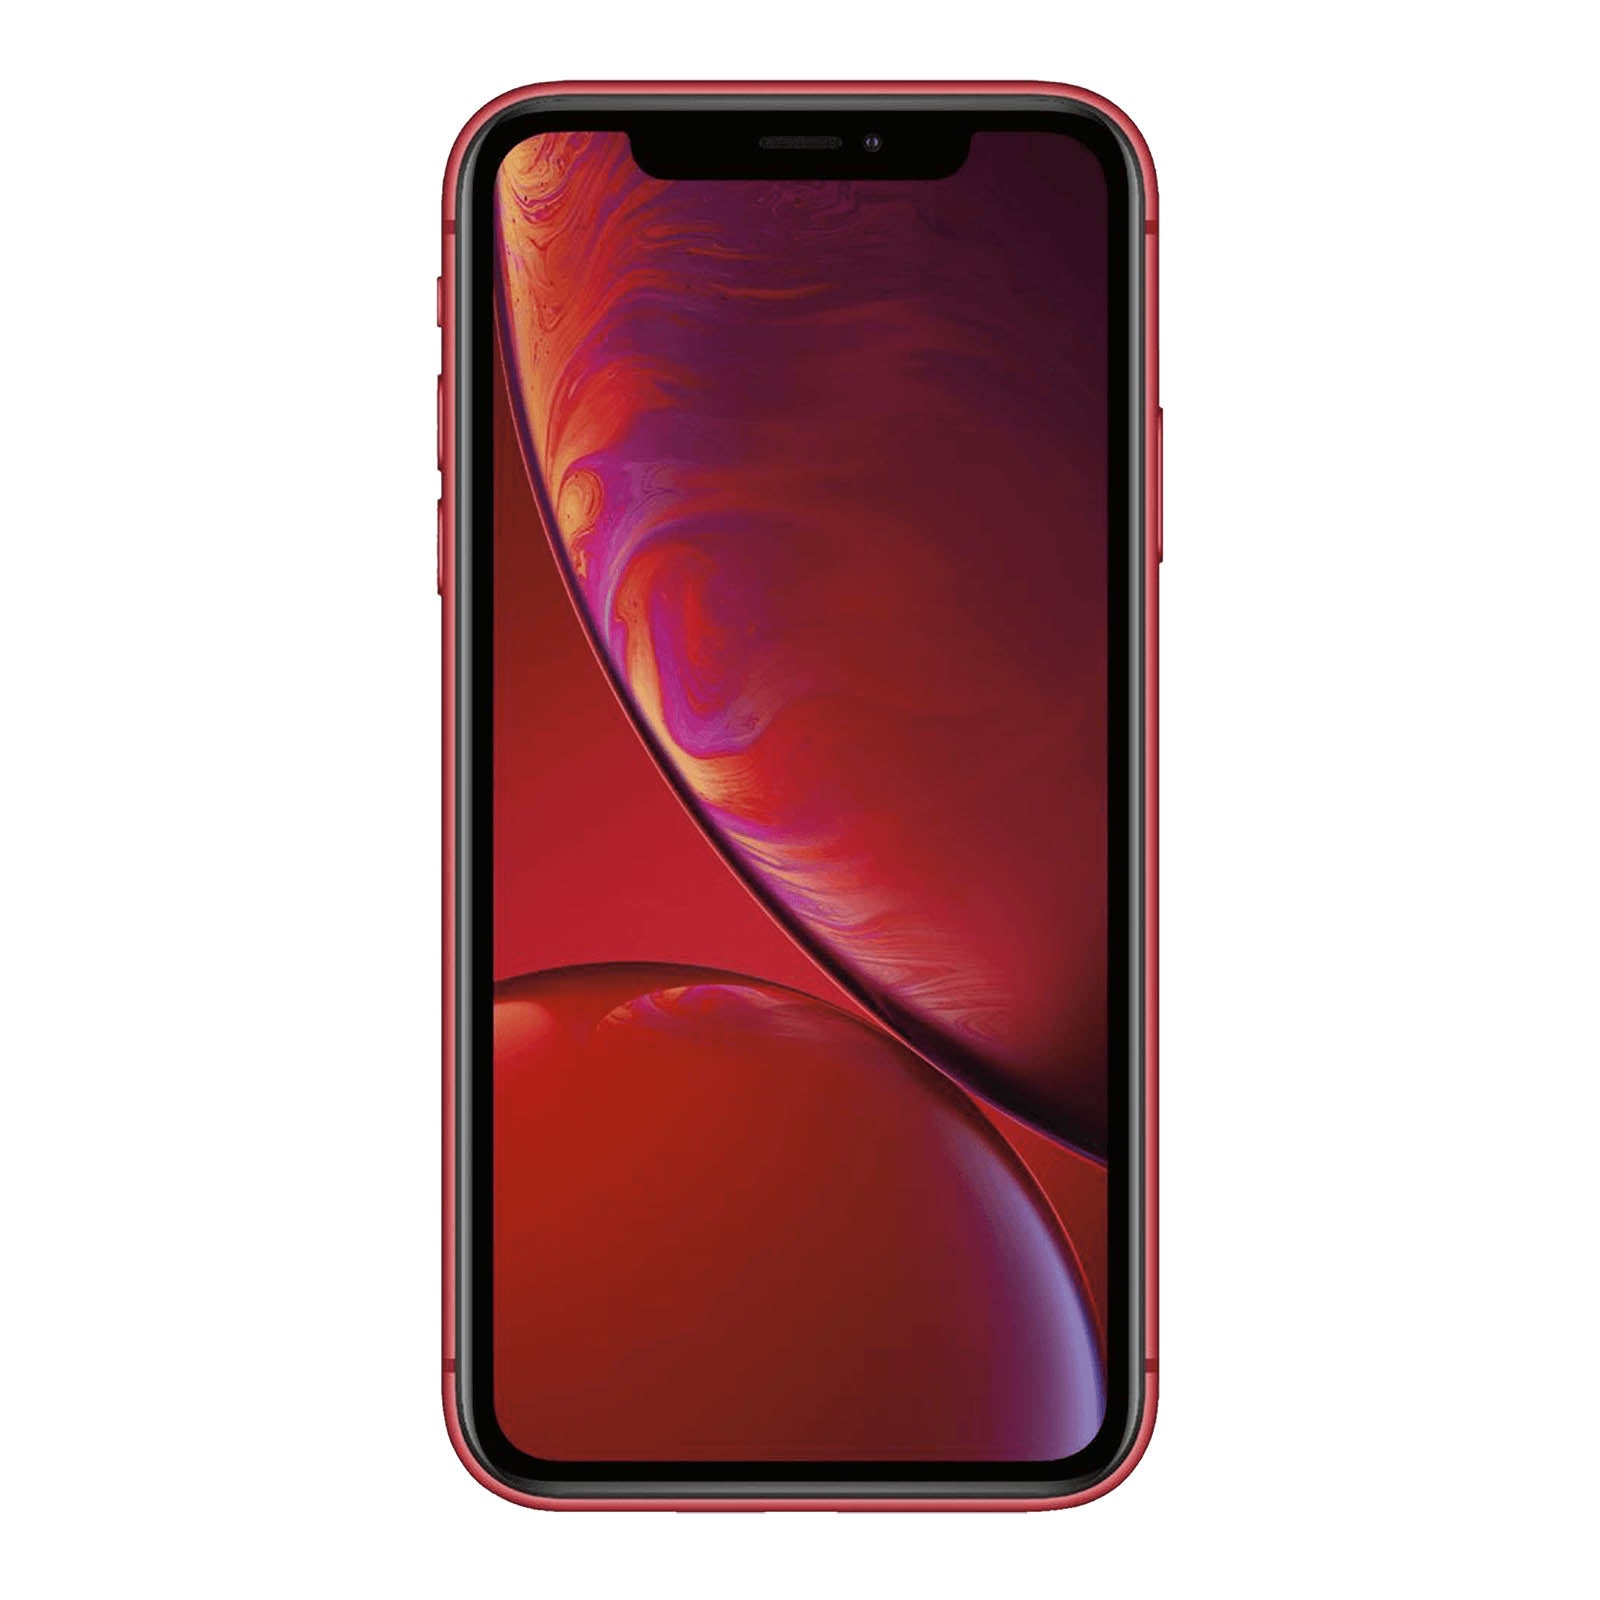 Apple iPhone XR 128GB Product Red Very Good - AT&T